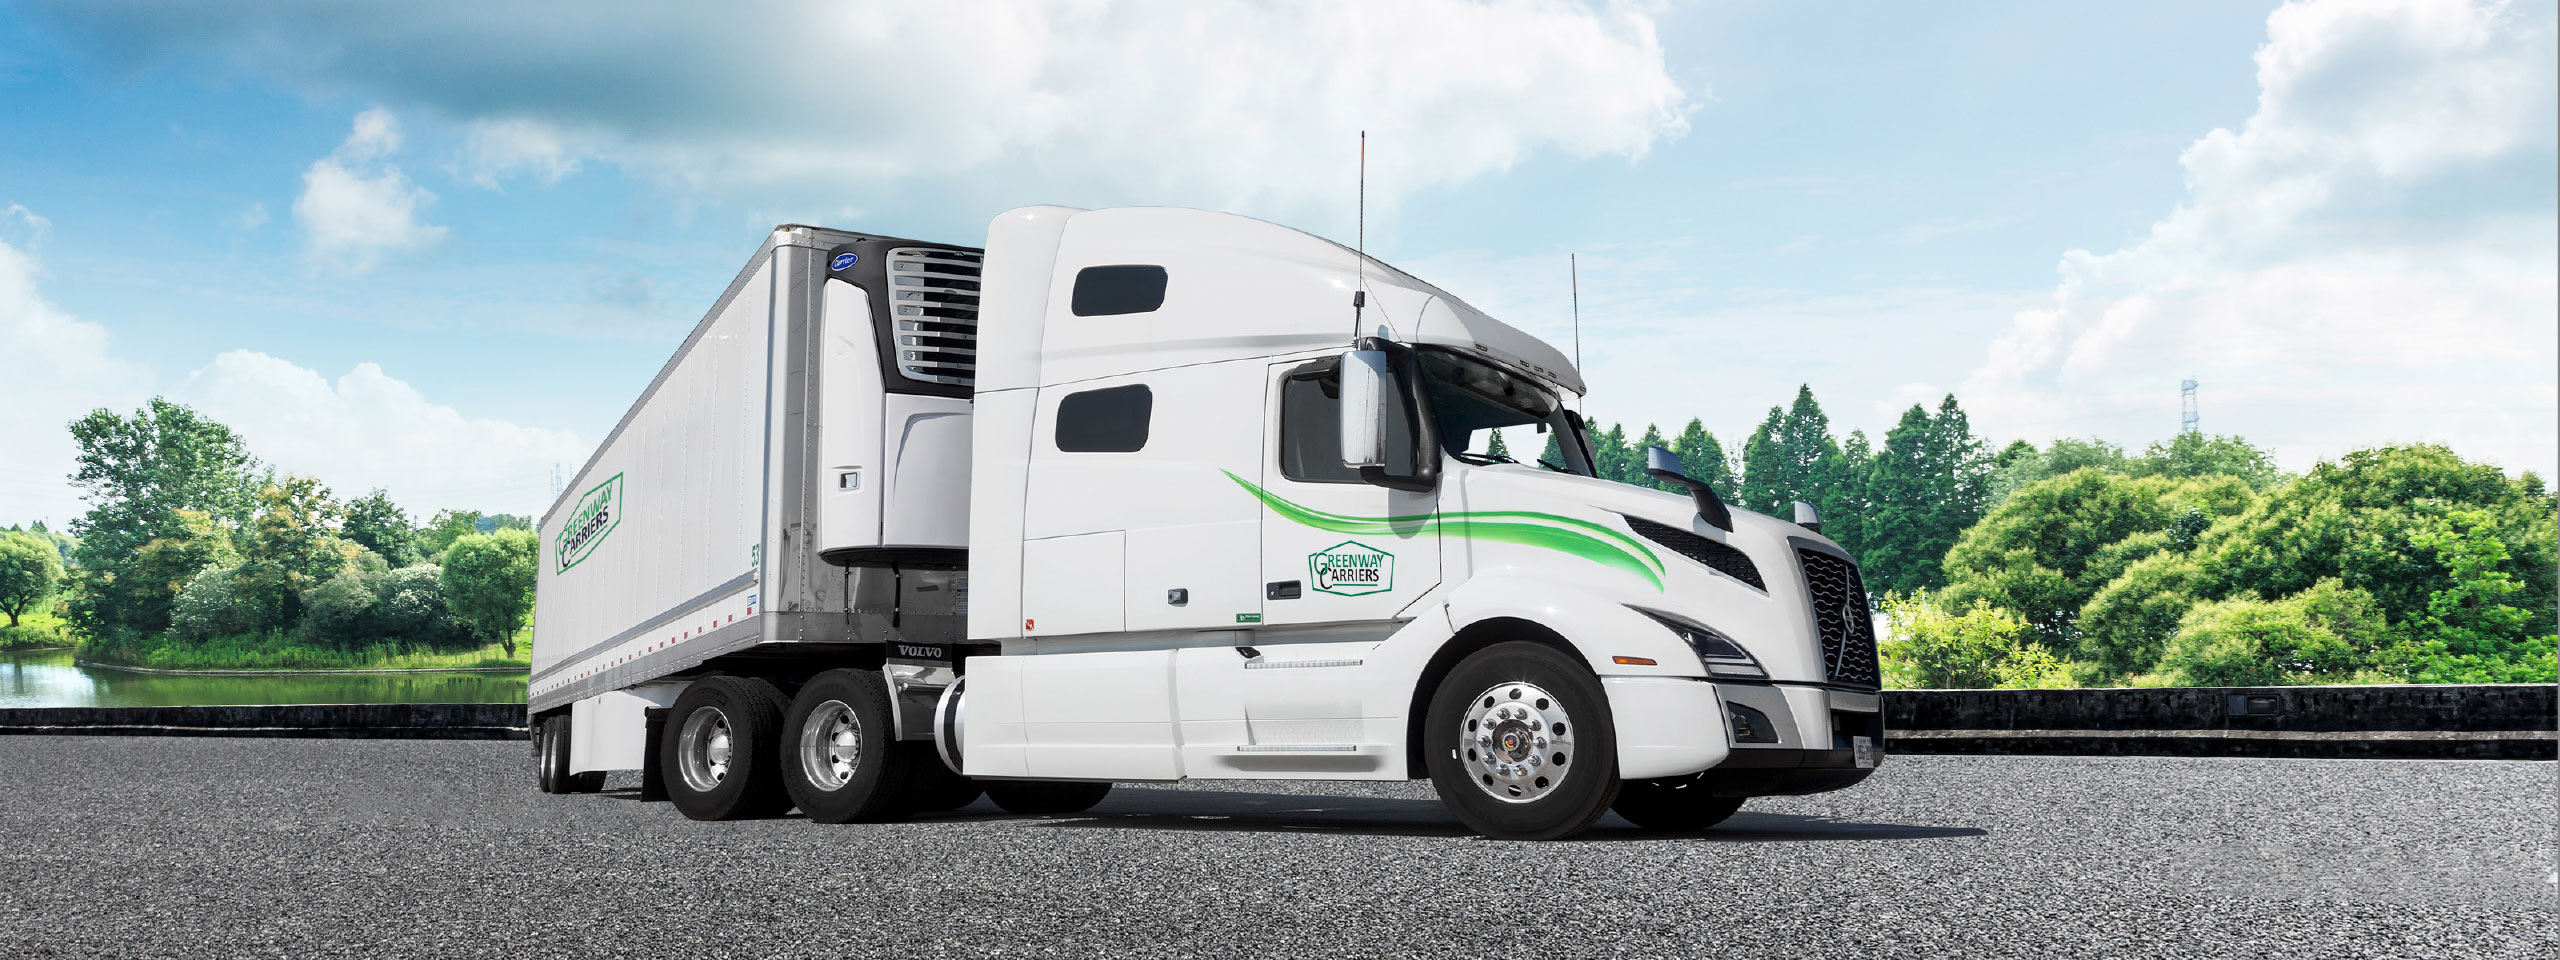 Greenway Carriers Reefer Truck for temperature controlled freight